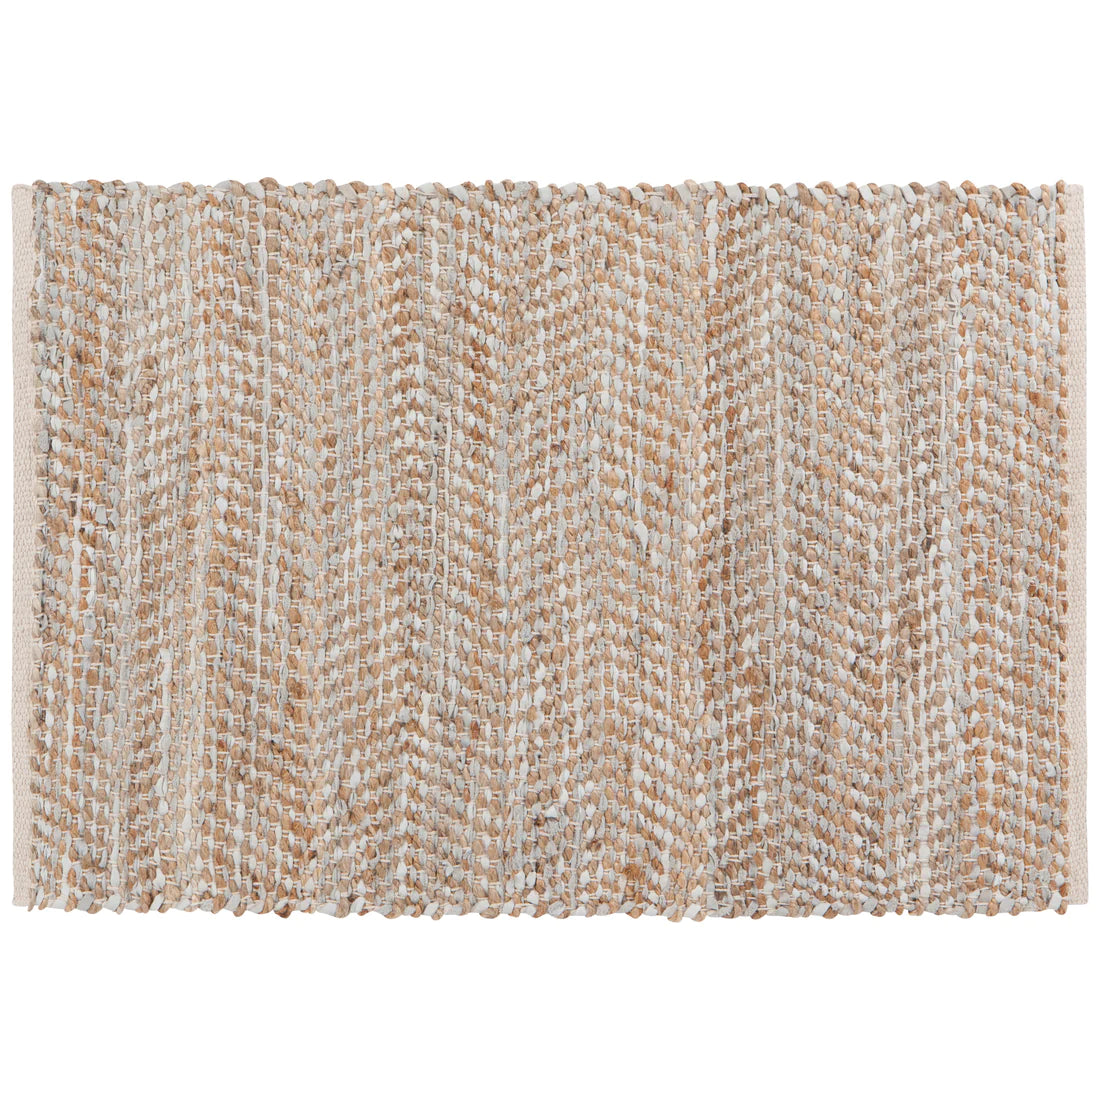 Recycled Leather Chindi Rugs - Miller Gray